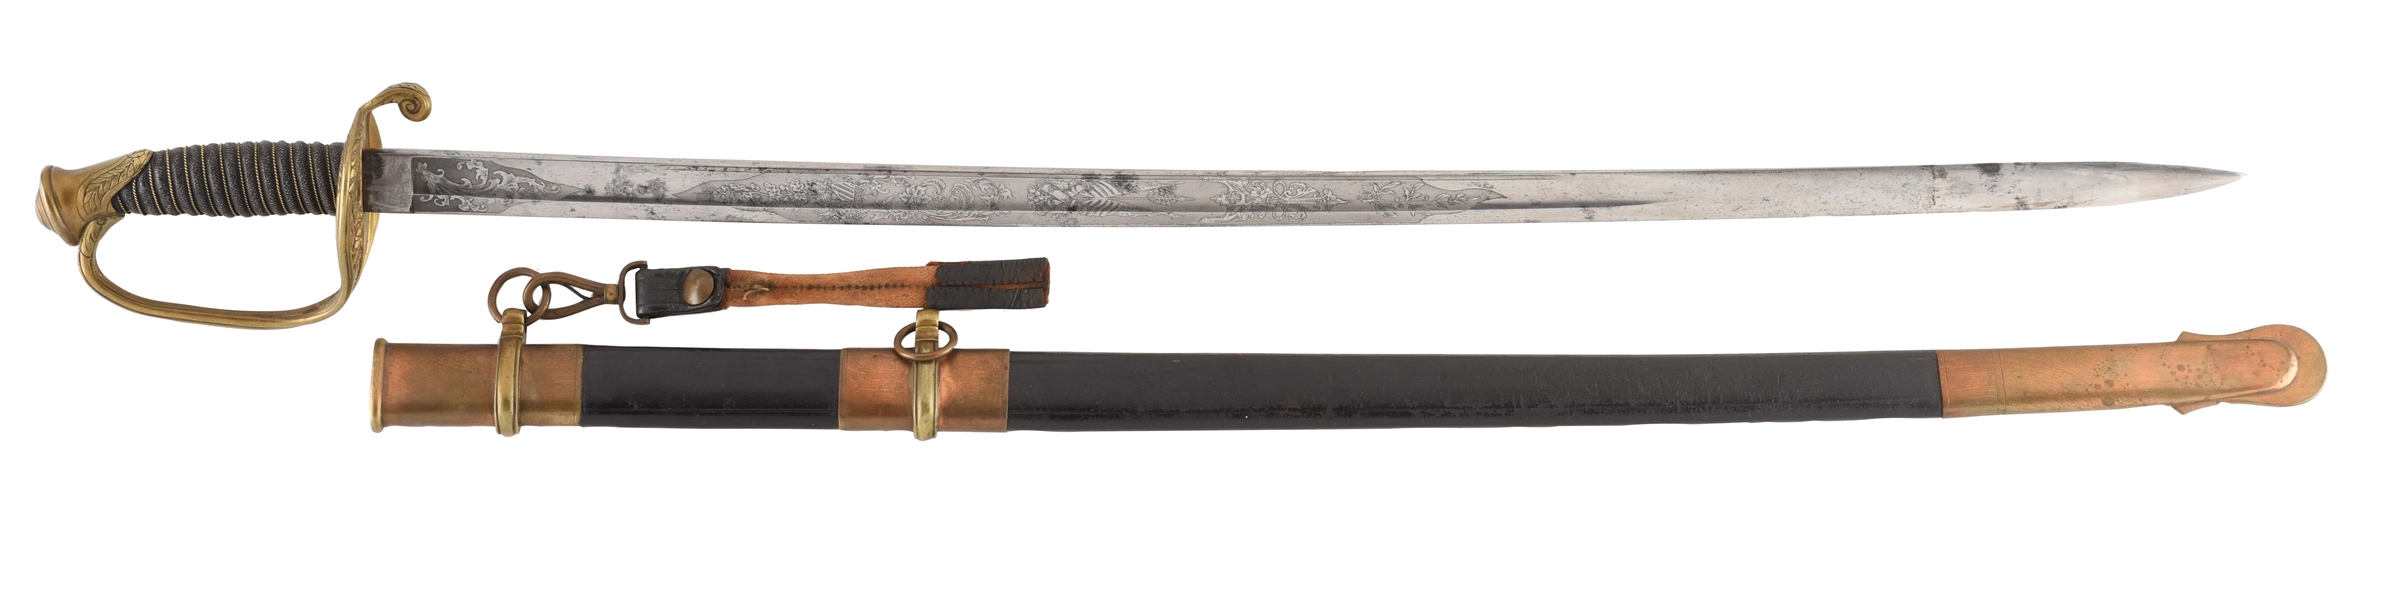 TIFFANY RETAILED US MODEL 1850 FOOT OFFICERS SWORD.